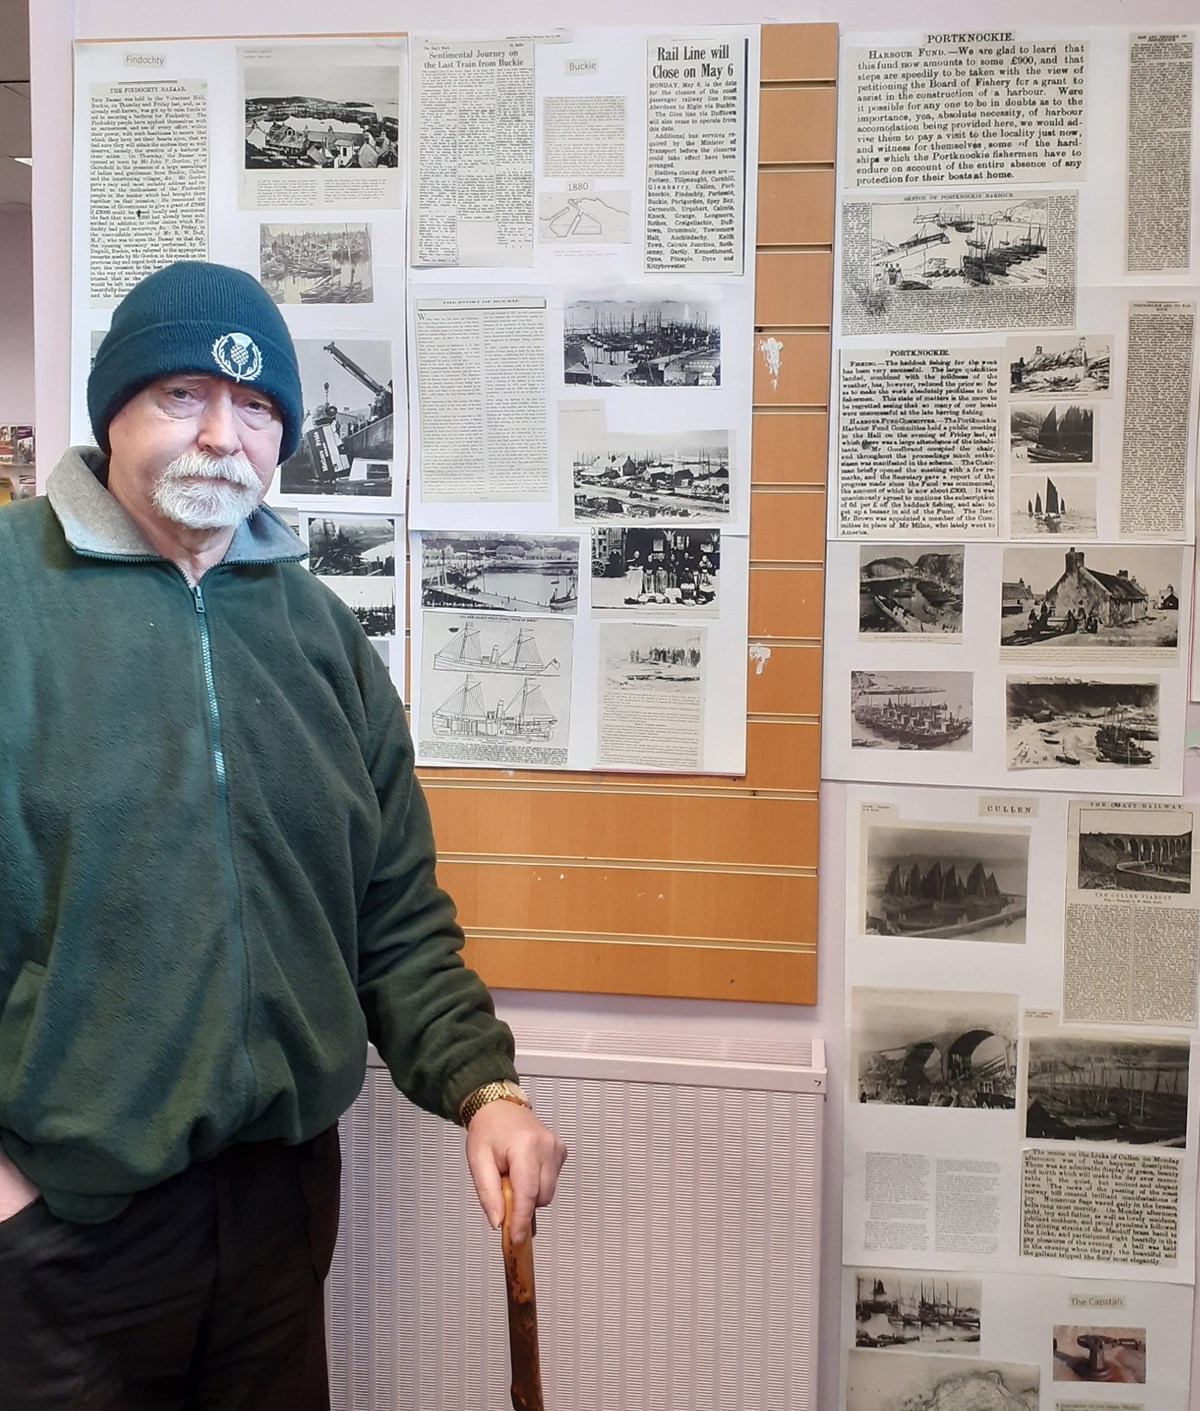 Tony Slater stands next to one of his exhibitions at the heritage centre.